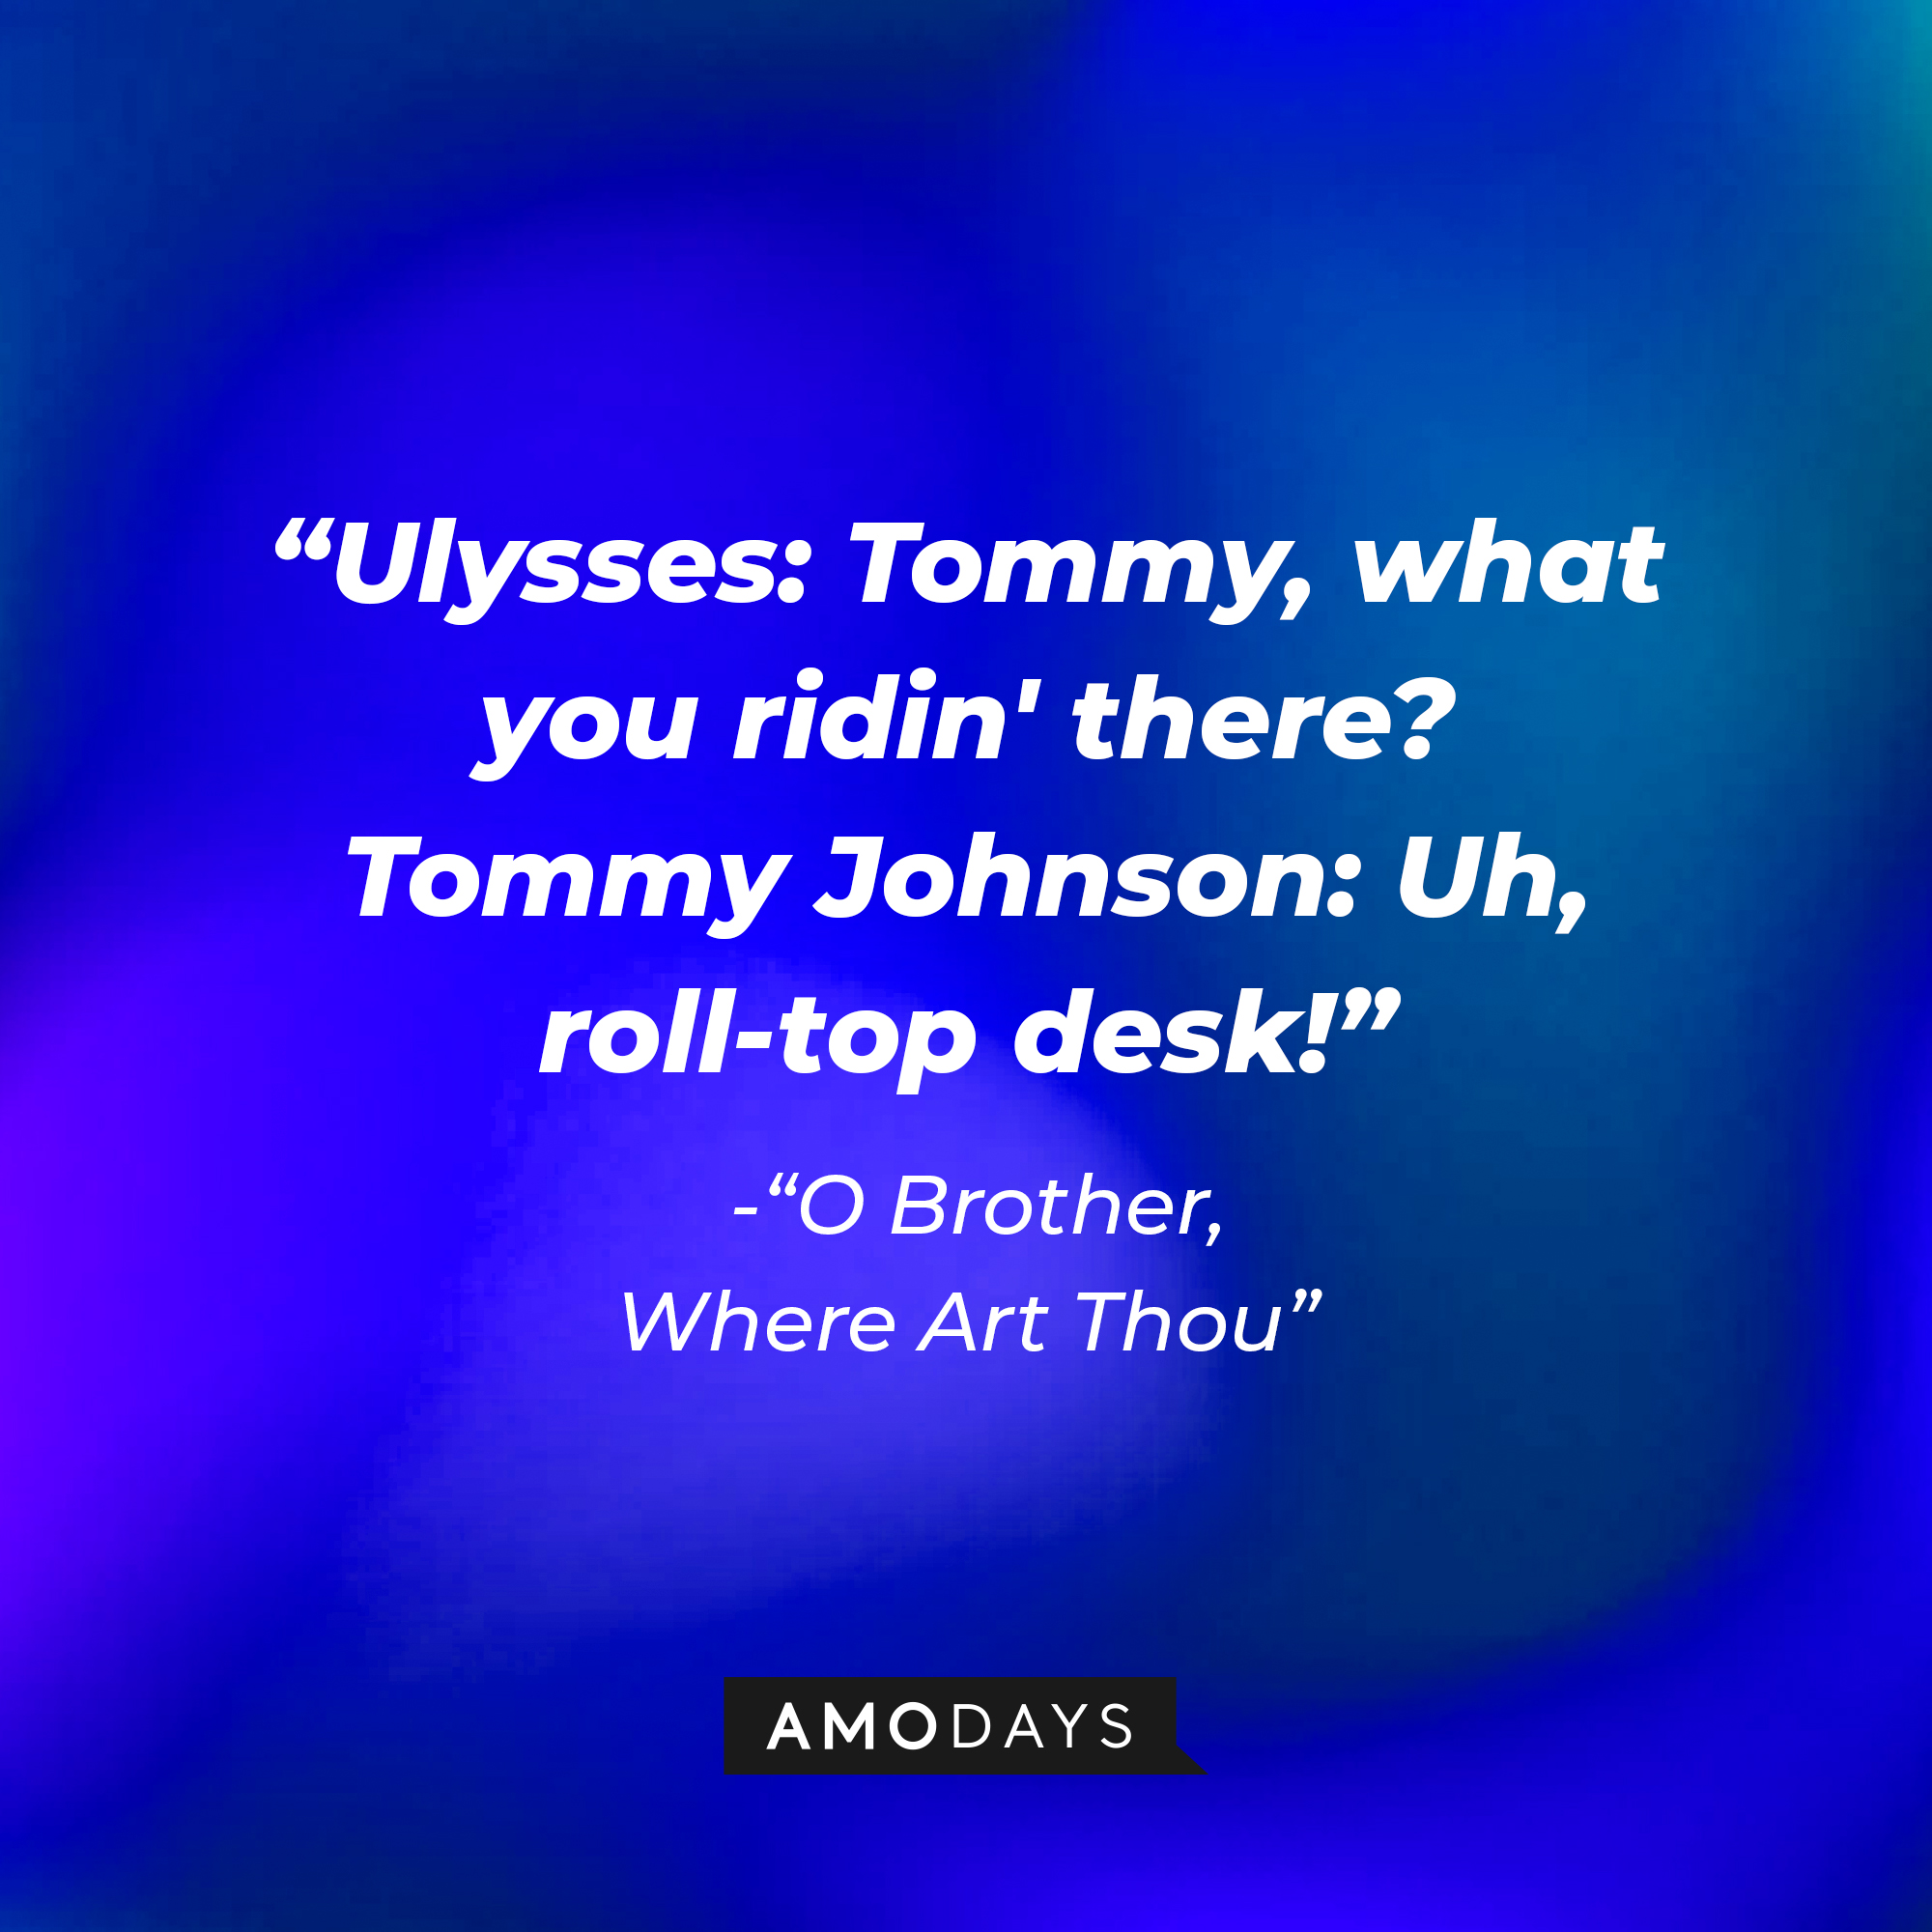 Ulysses Everett McGill's dialogue in "O Brother, Where Art Thou:" "Ulysses: Tommy, what you ridin' there? ; Tommy Johnson: Uh, roll-top desk!" | Source: AmoDays